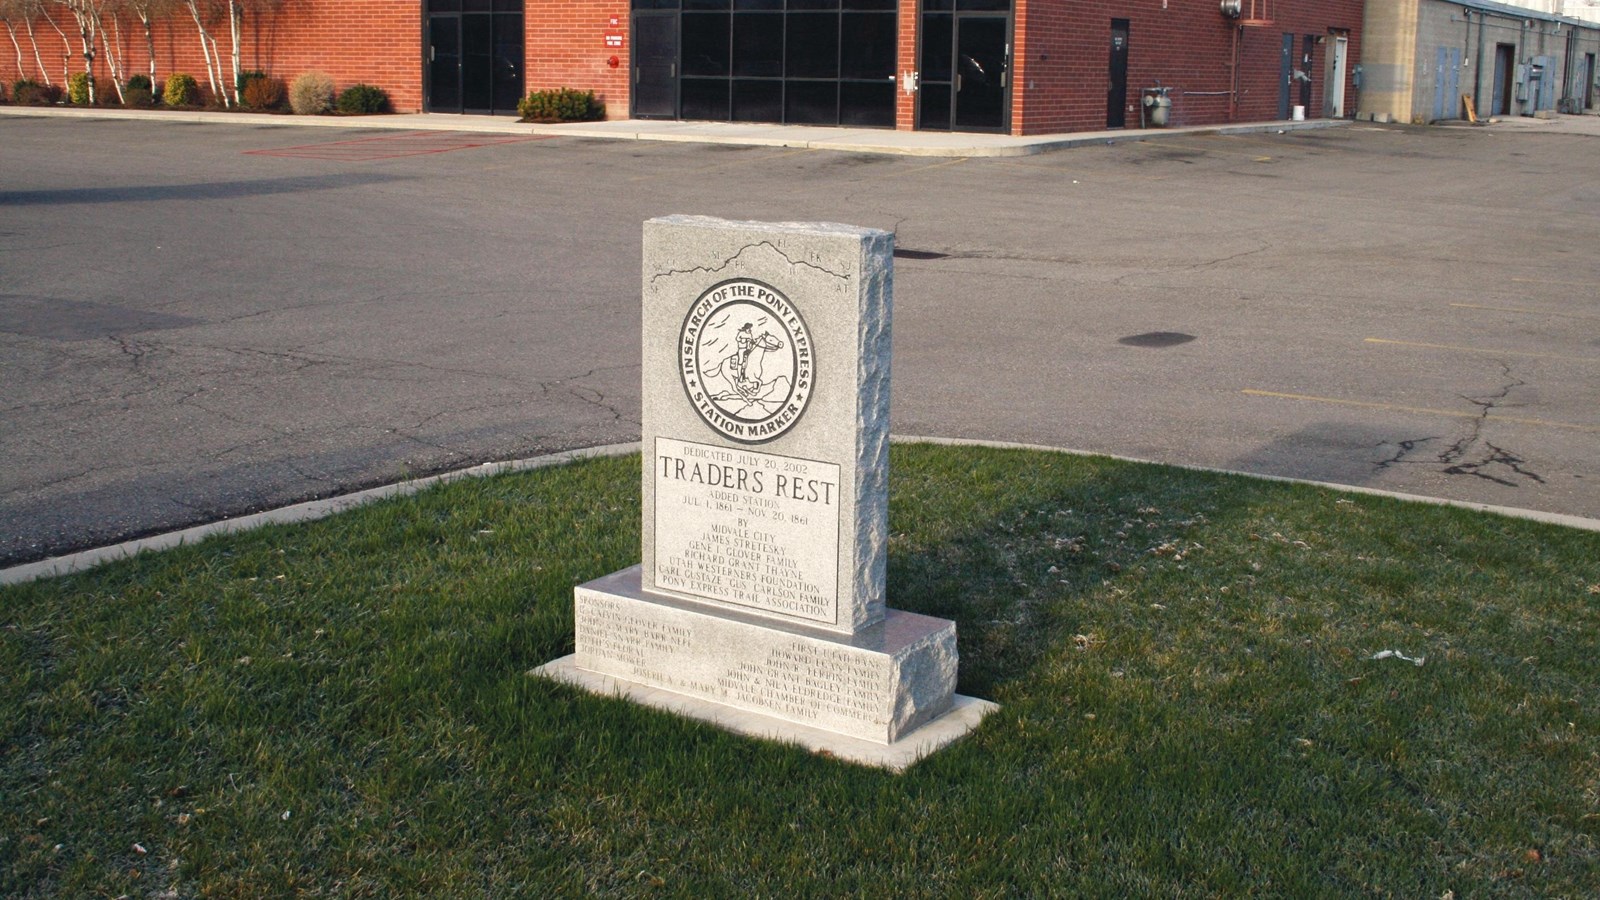 A stone monument with an inscription stands in a grassy corner of a parking lot.